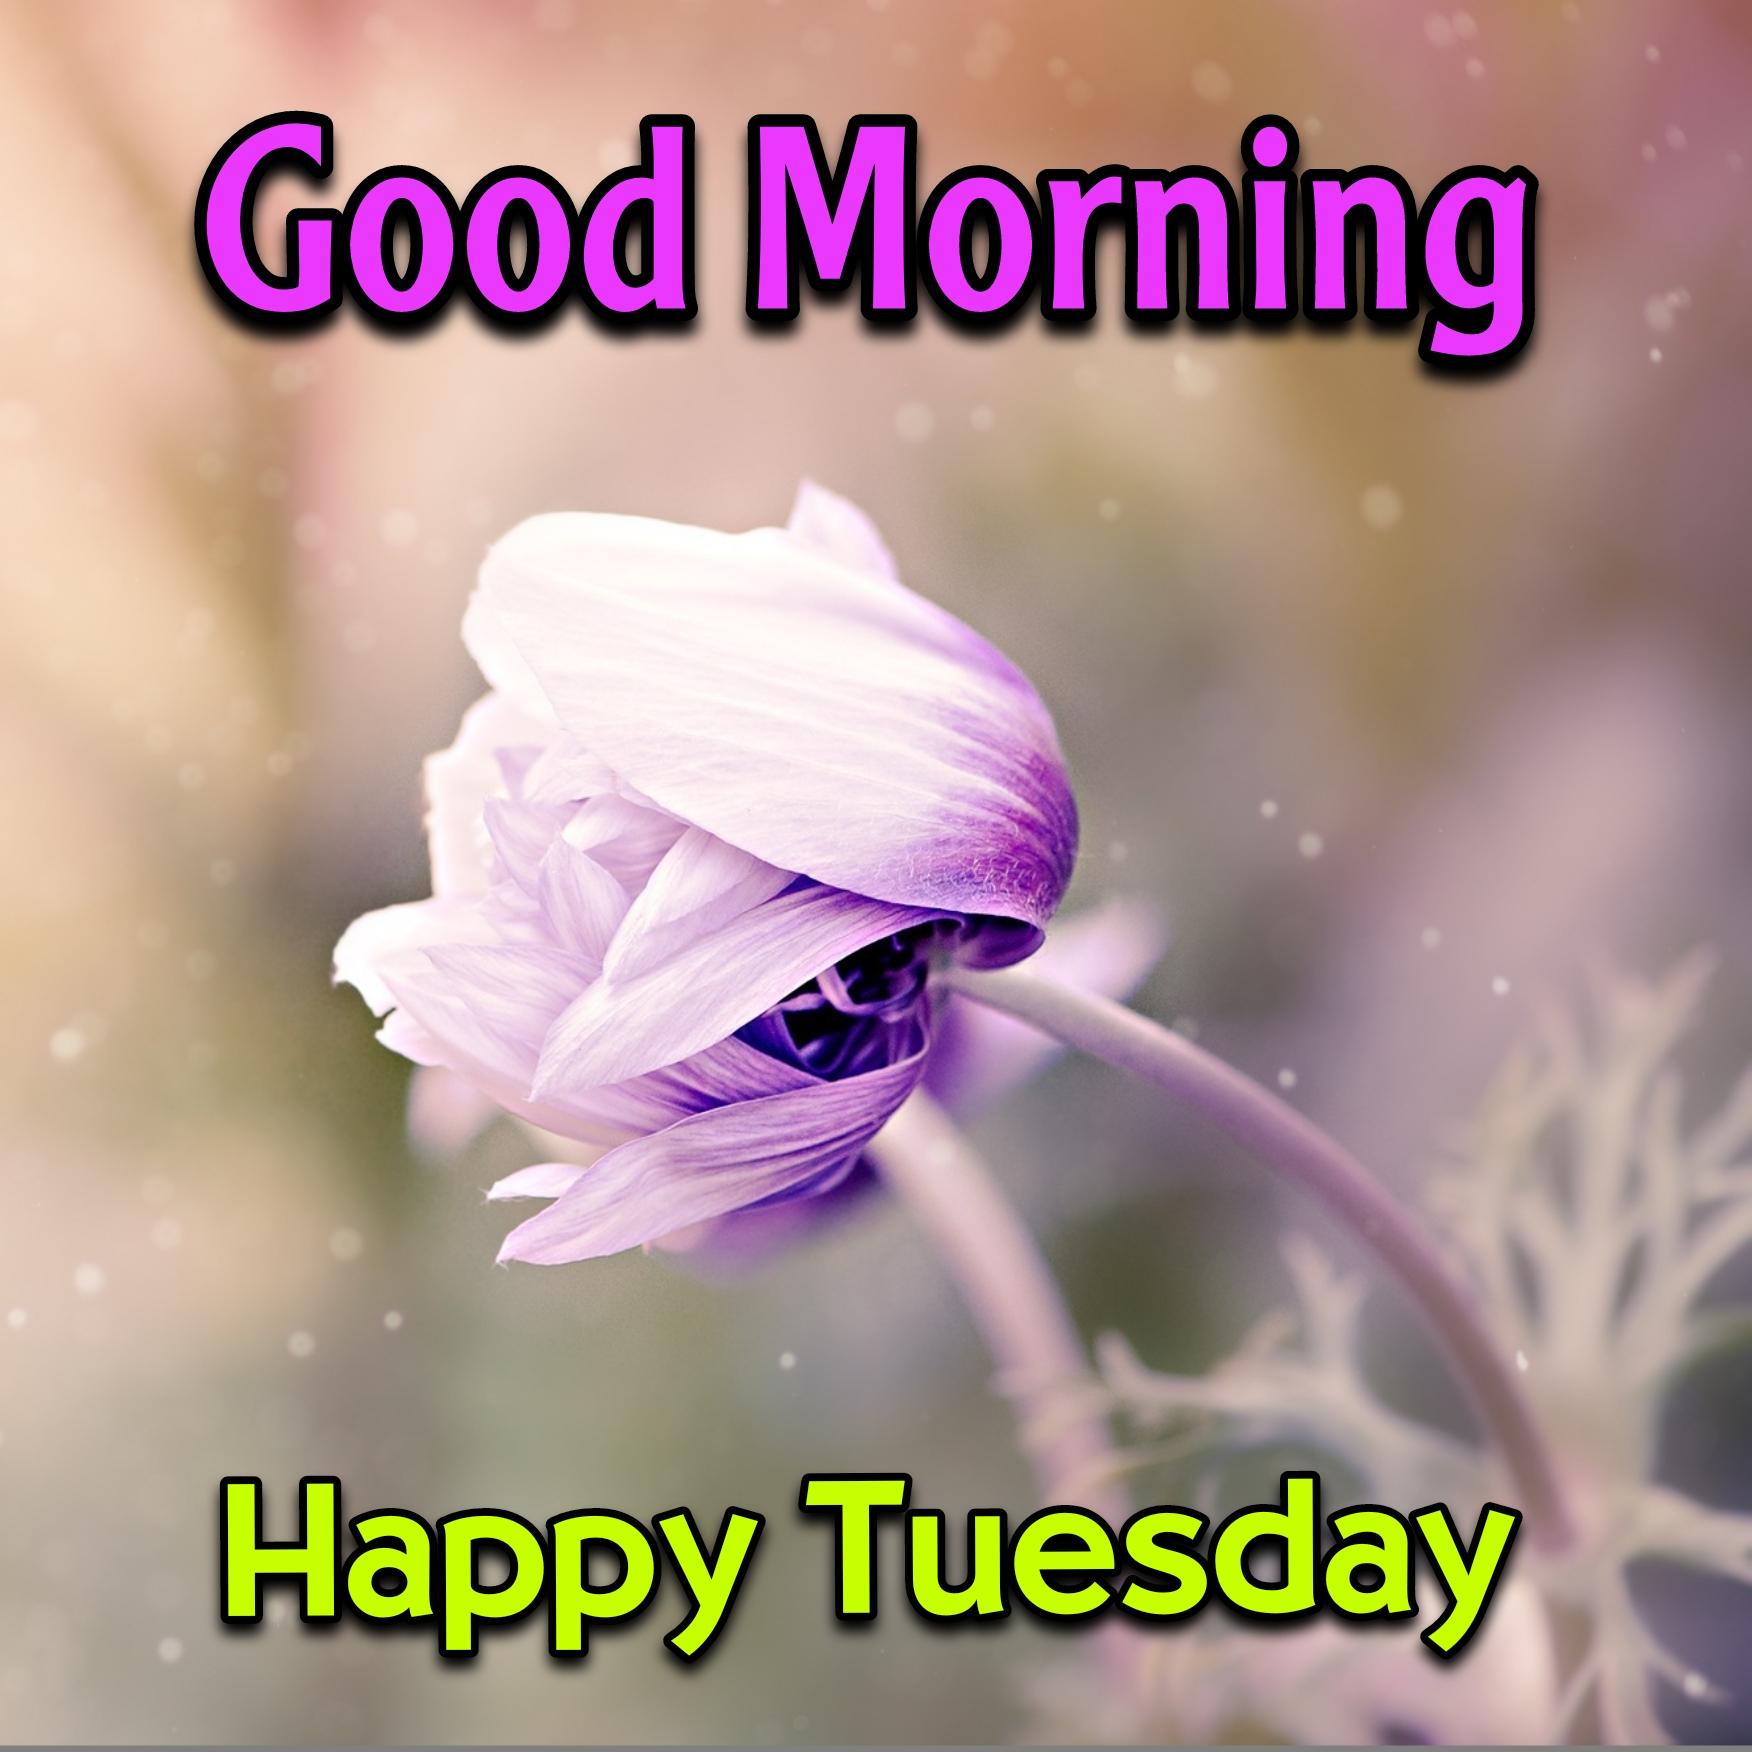 Tuesday Good Morning Images Hd